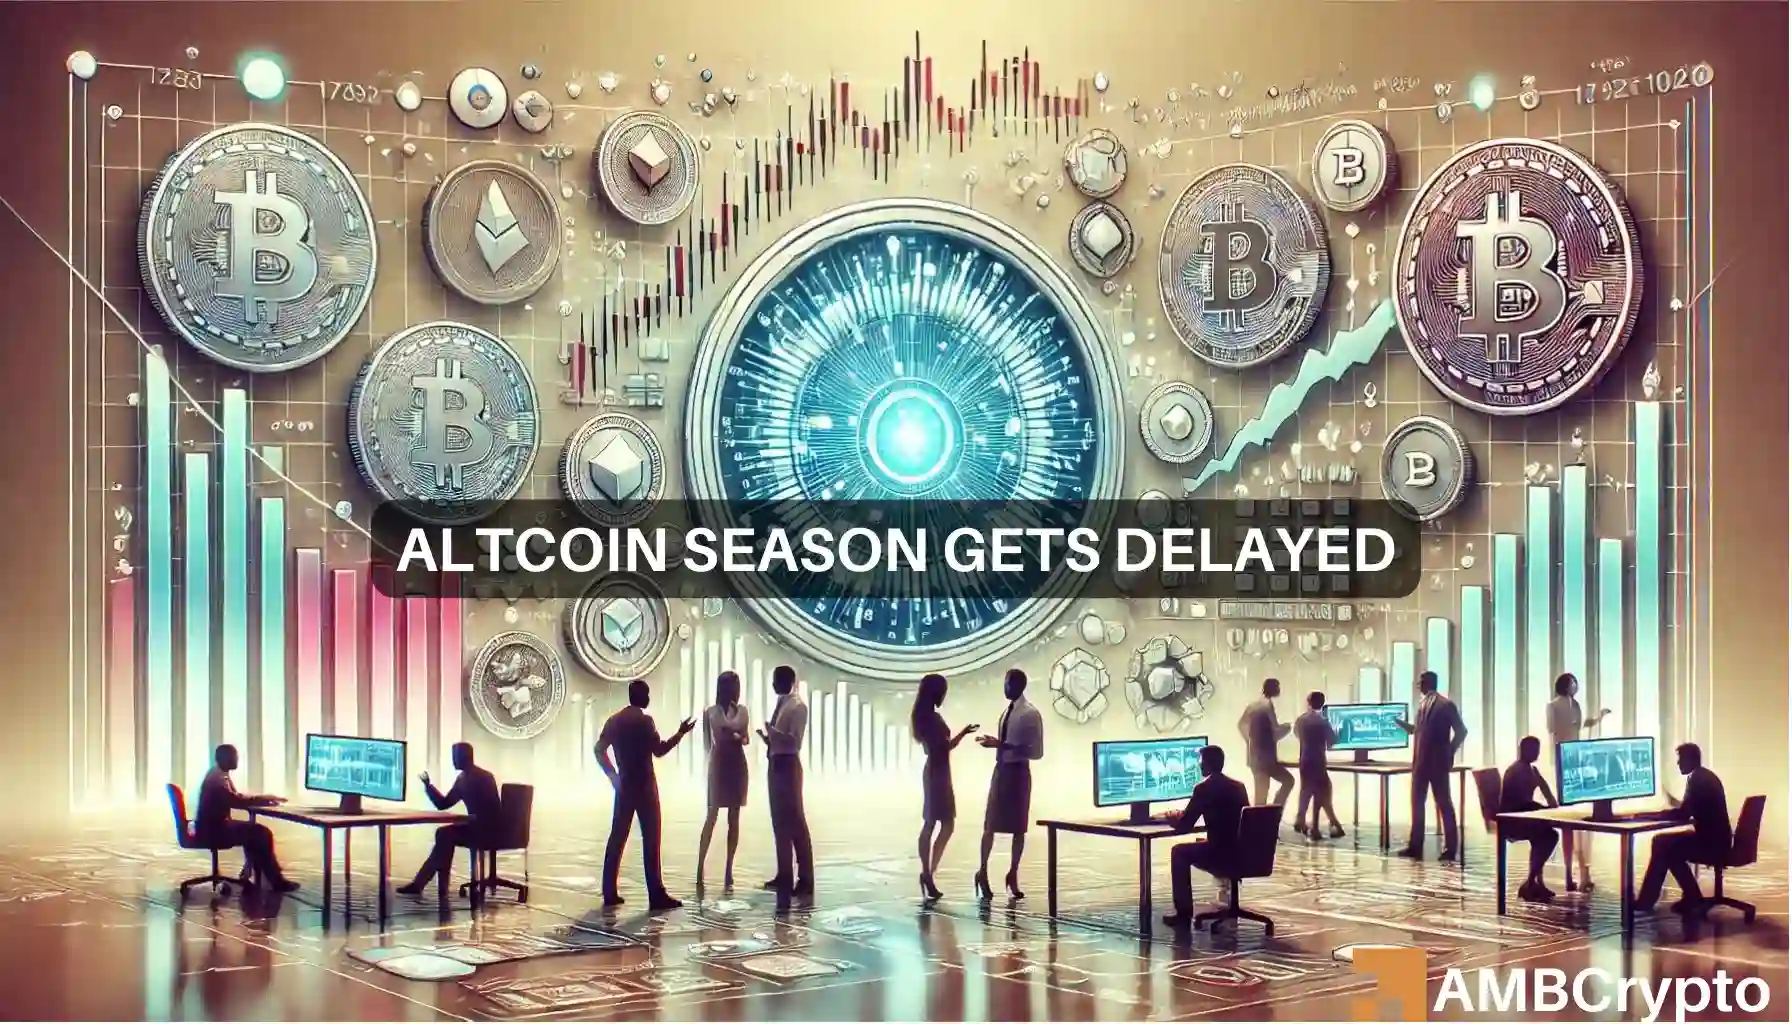 Unpacking the Altcoin Season Index: What a score of 16 means for you